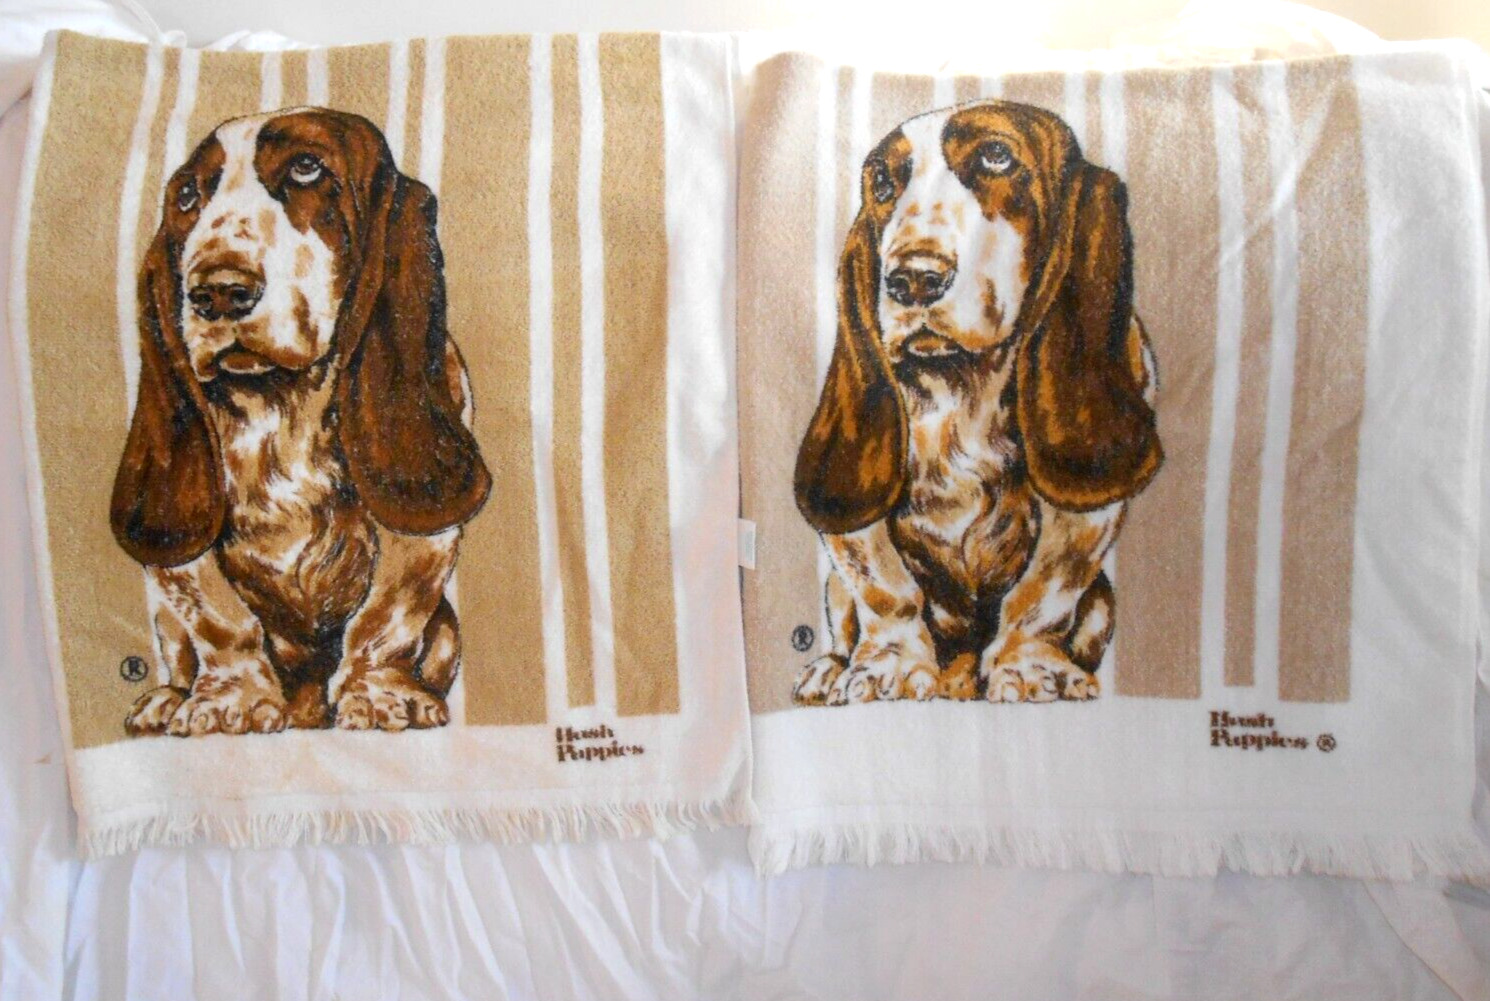 Vintage Lot of 2 HUSH PUPPIES Shoes BASSET HOUND Dog Advertising Towels 40 x 22